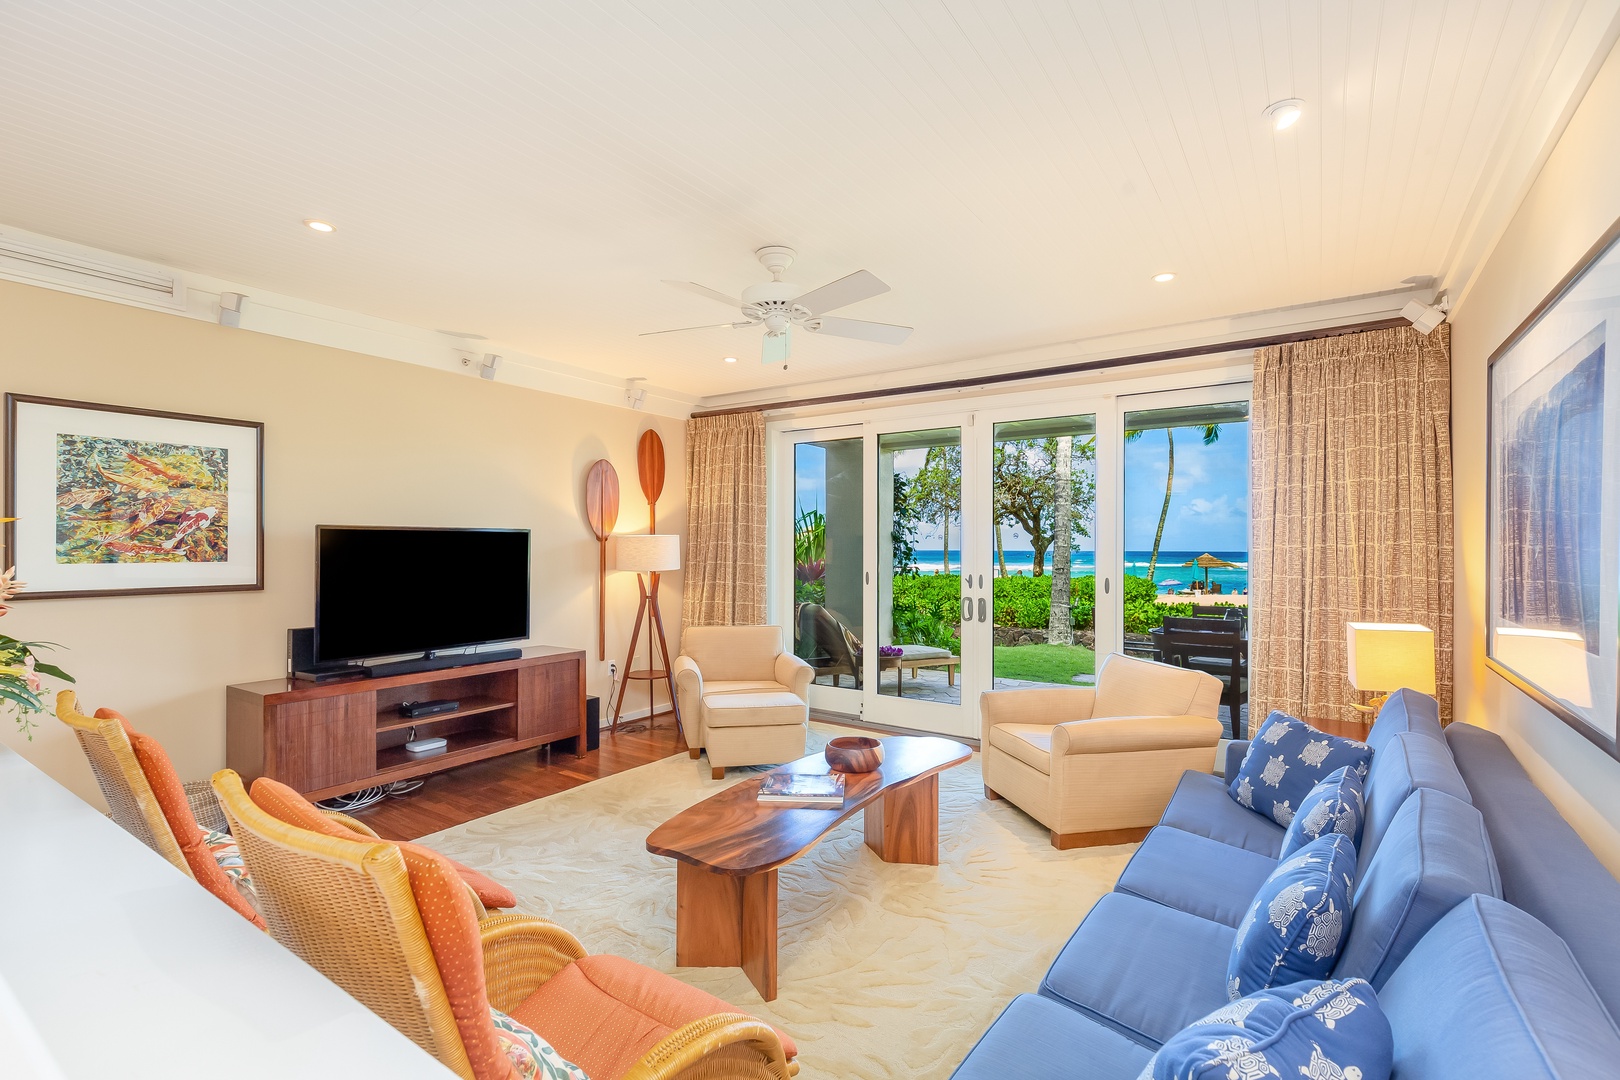 Kahuku Vacation Rentals, Turtle Bay Villas 101 - Living room with a view